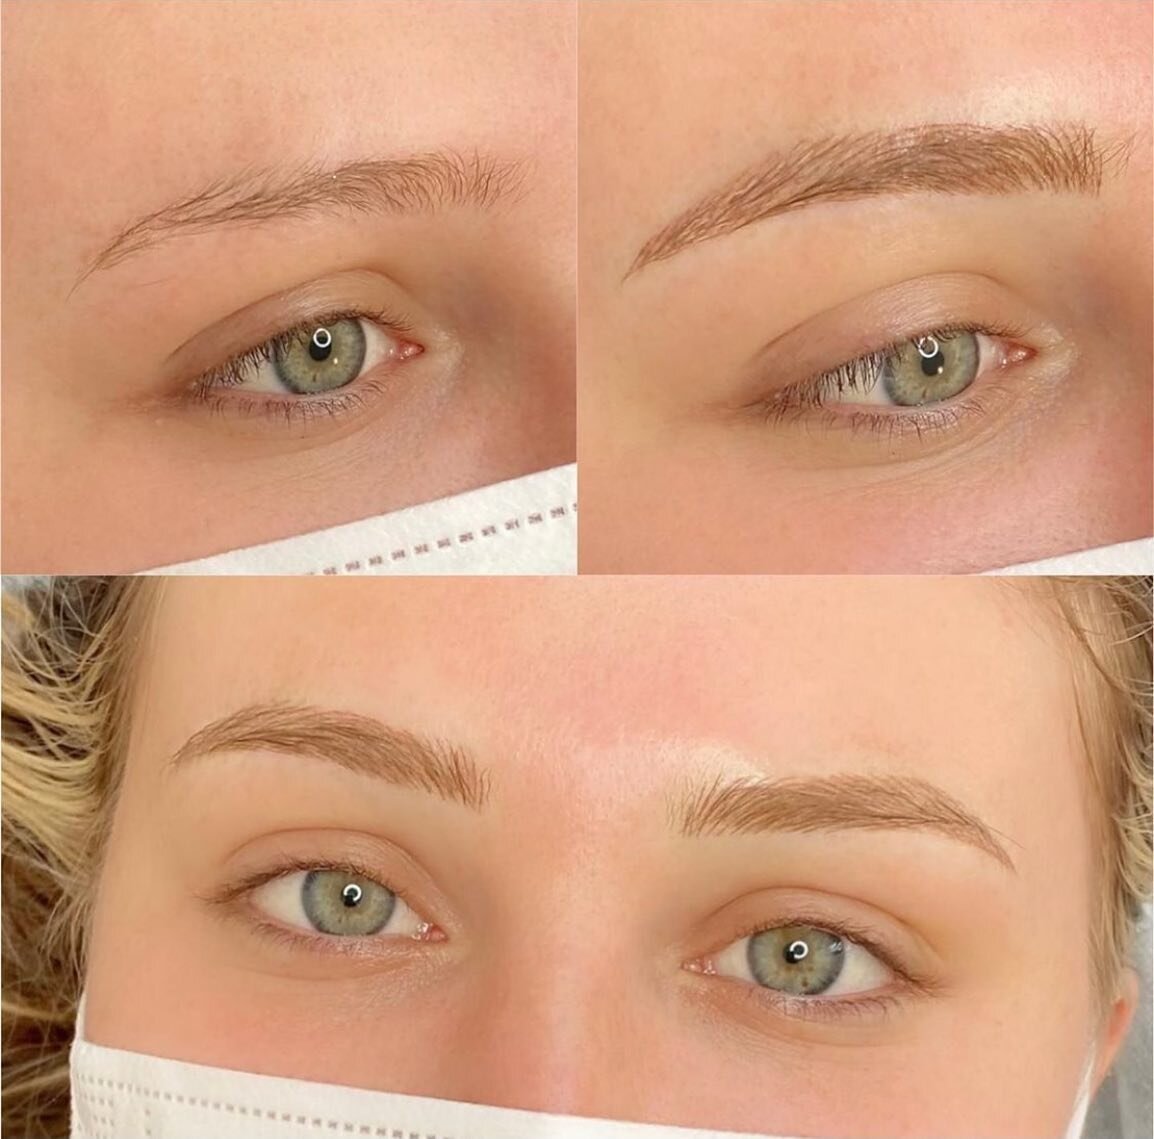 Sharing a few blonde brows from the past!
&mdash;
Technique: Nano Feather Brows
Pain level: None
Appointment time: 2 hours
Sessions: 2 required
Healing time: 7-10 days (no scabbing)
Last: 2-3+ years (depends on skin type)
&mdash;
For pricing &amp; bo